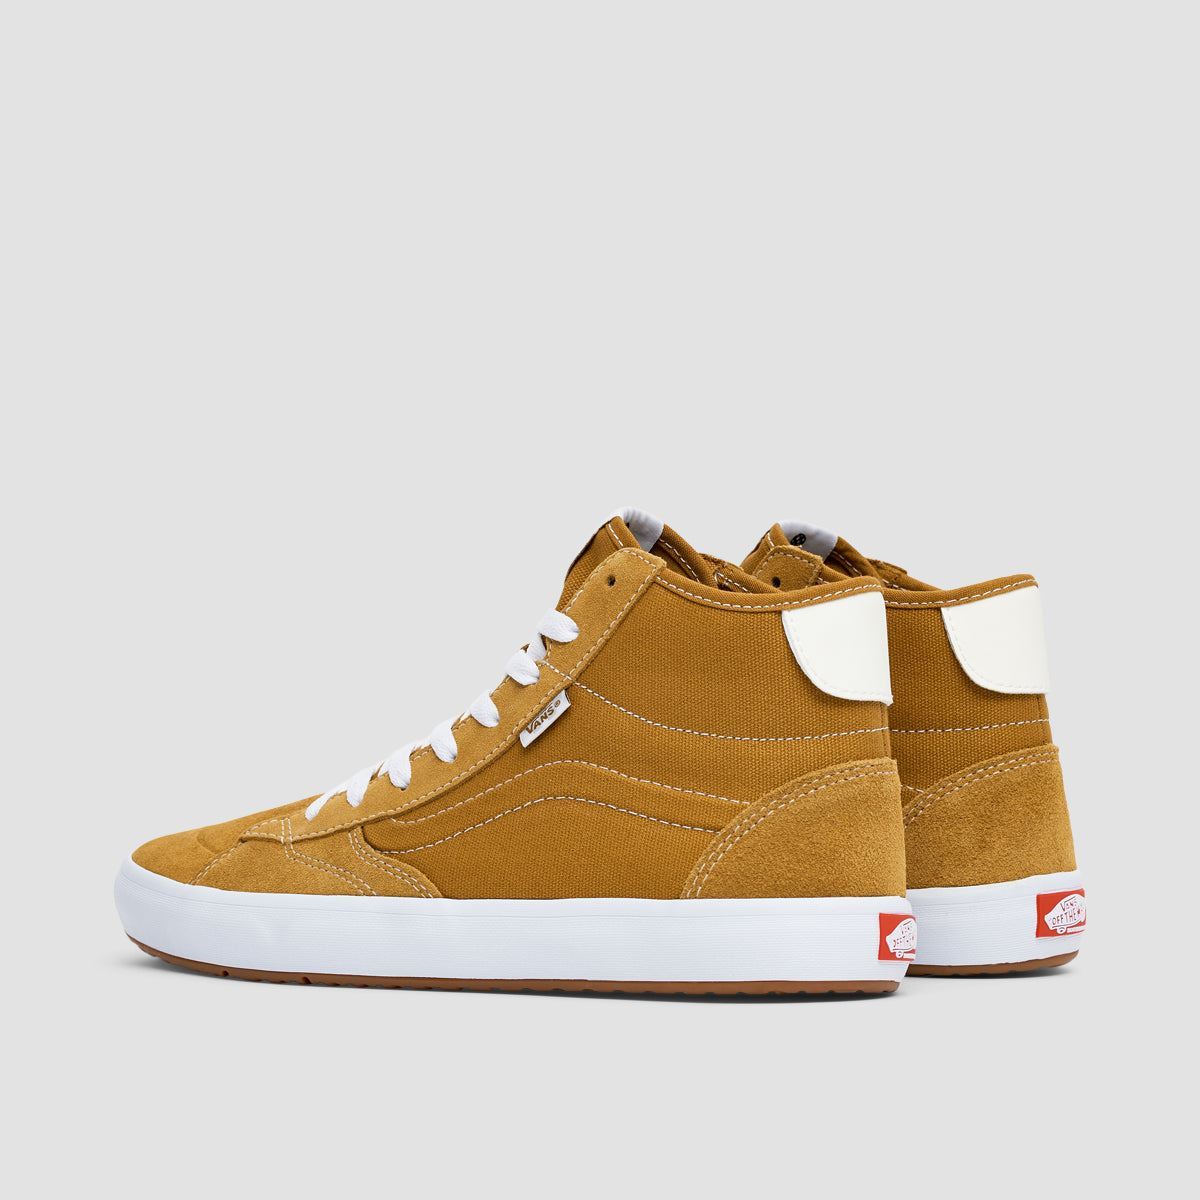 Vans The Lizzie High Top Shoes - Gold/White